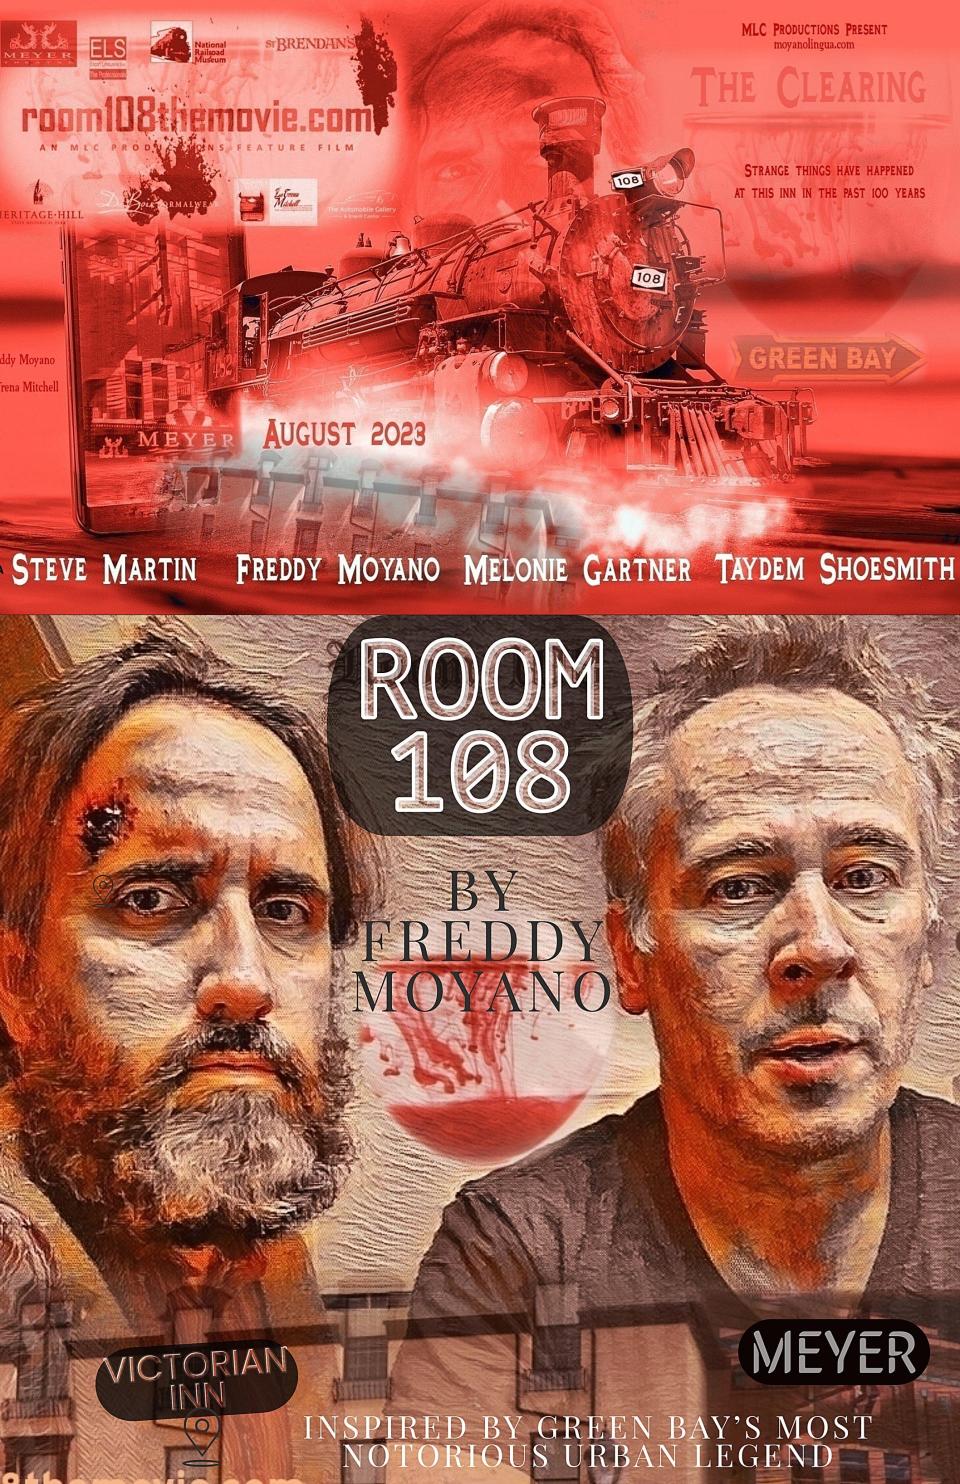 "Room 108: The Clearing" began shooting in Green Bay in November. It will premiere on Aug. 27 at the MLC Awards at The Tarlton Theatre .